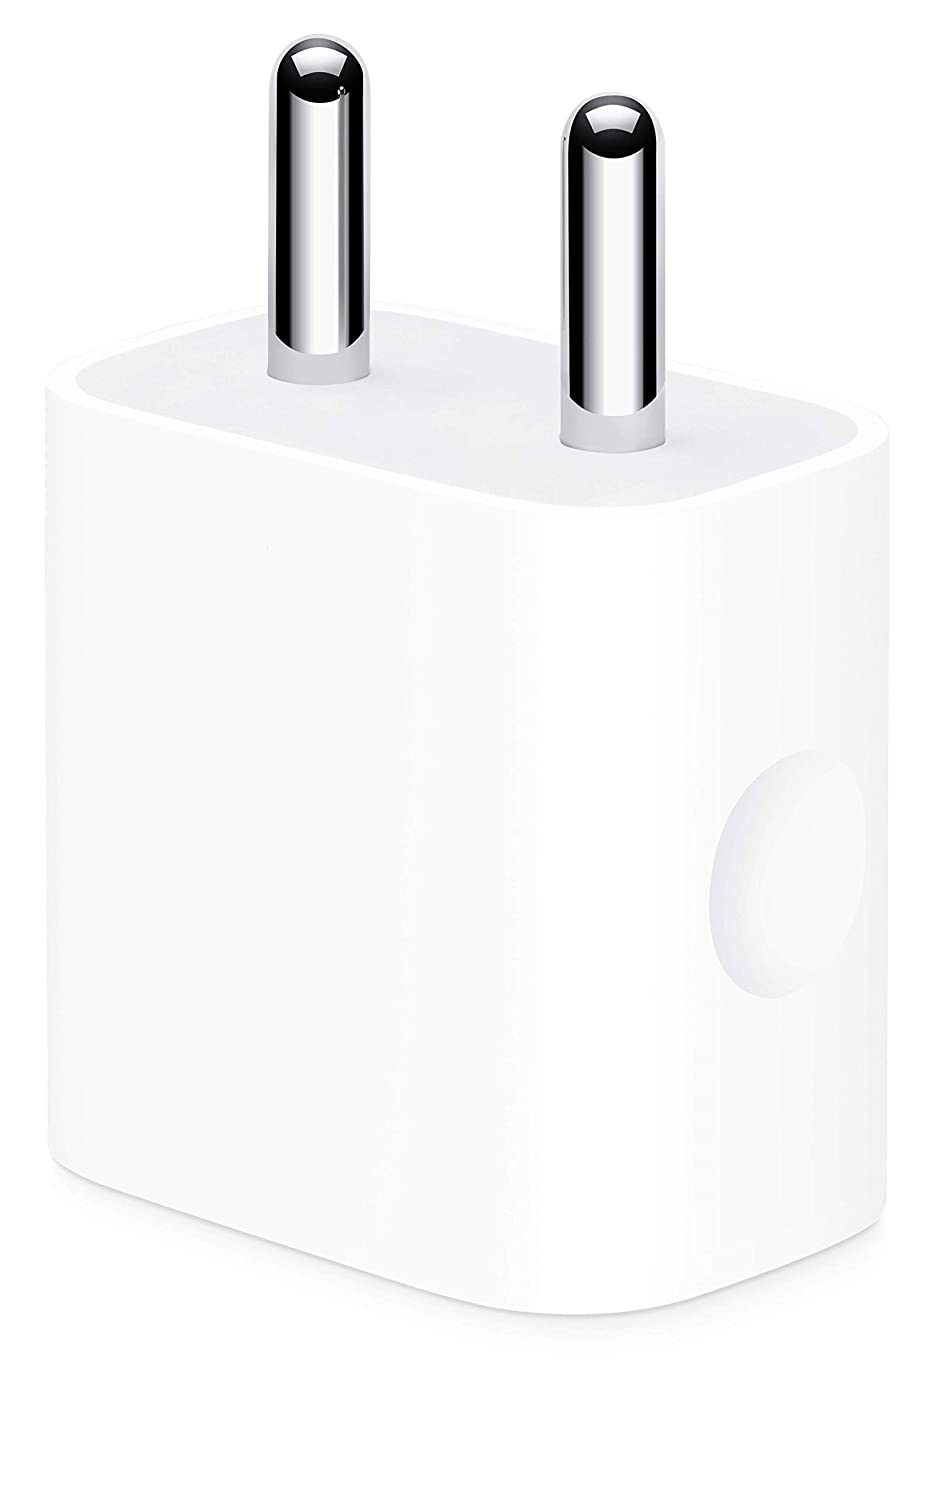 Amazon Deal: Offers on Useful Accessories for iPhone, Ipad or airpods, Buy Apple AirTag, MagSafe Charger & Apple Pencil at low prices